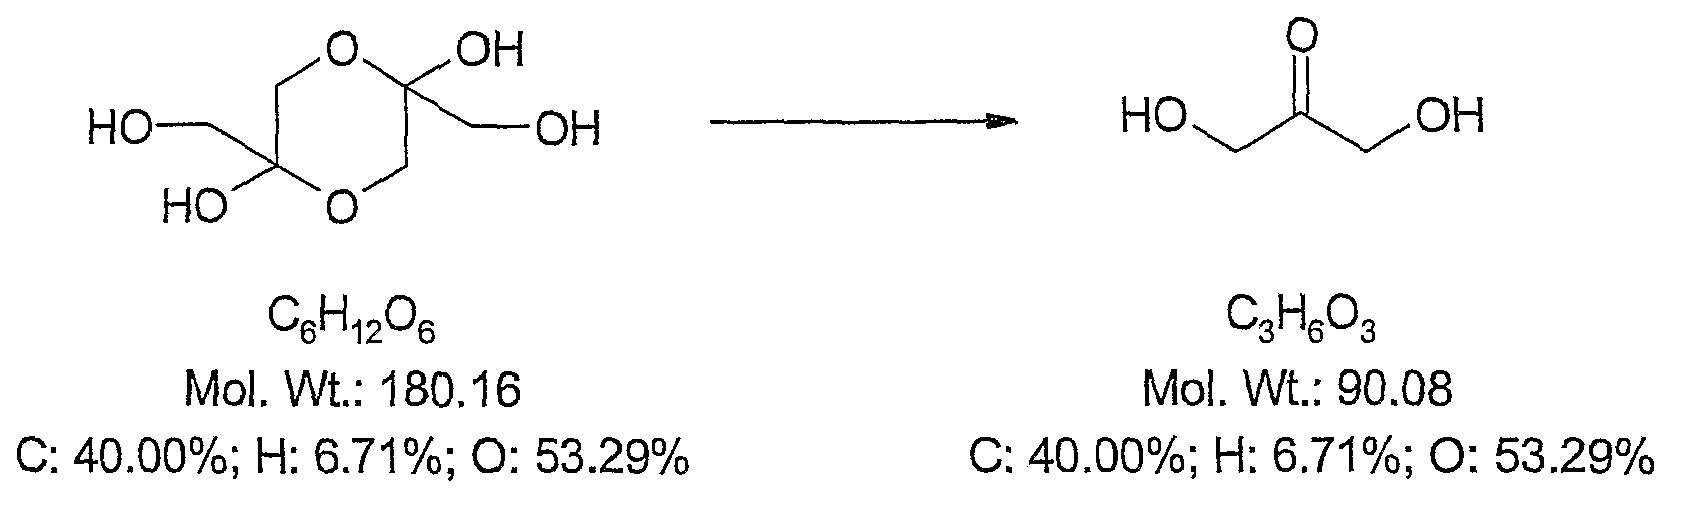 Use of alpha-hydroxy carbonyl compounds as reducing agents